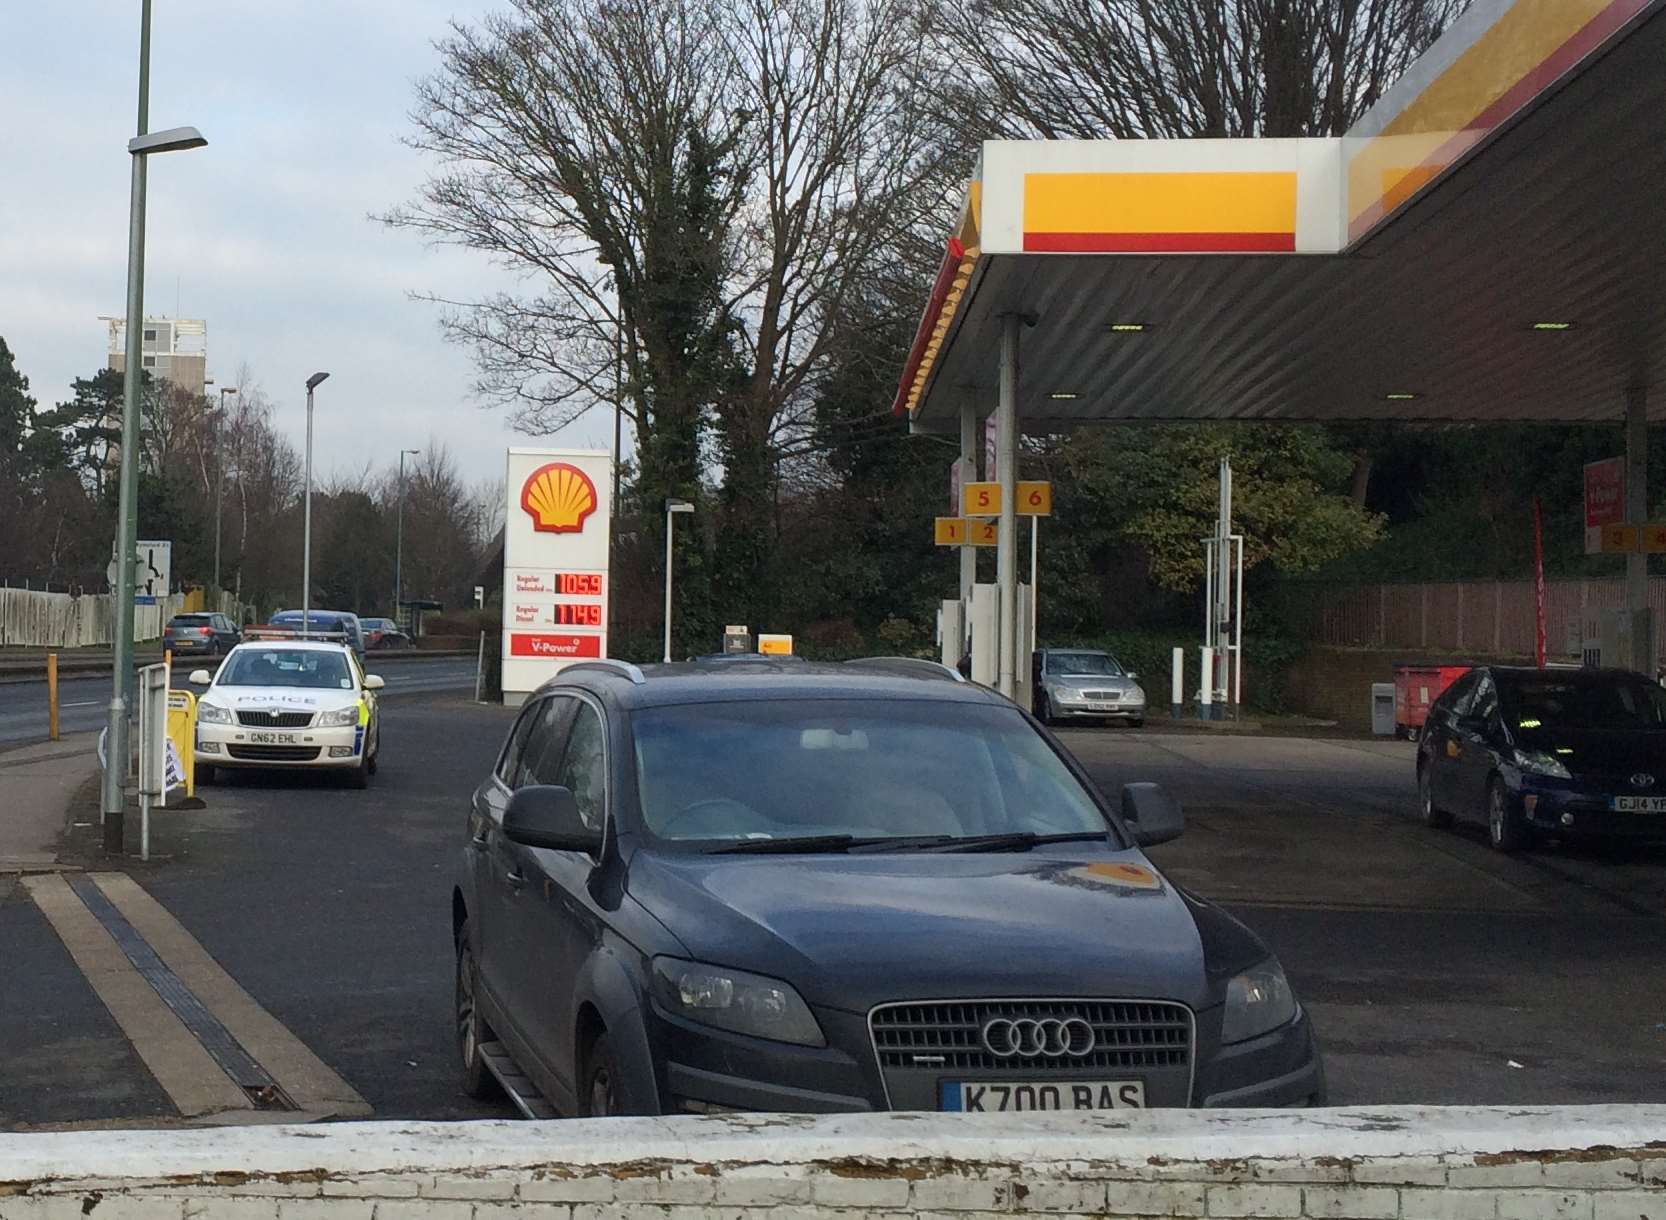 The incident took place further down Royal Engineer's Road at the Shell garage